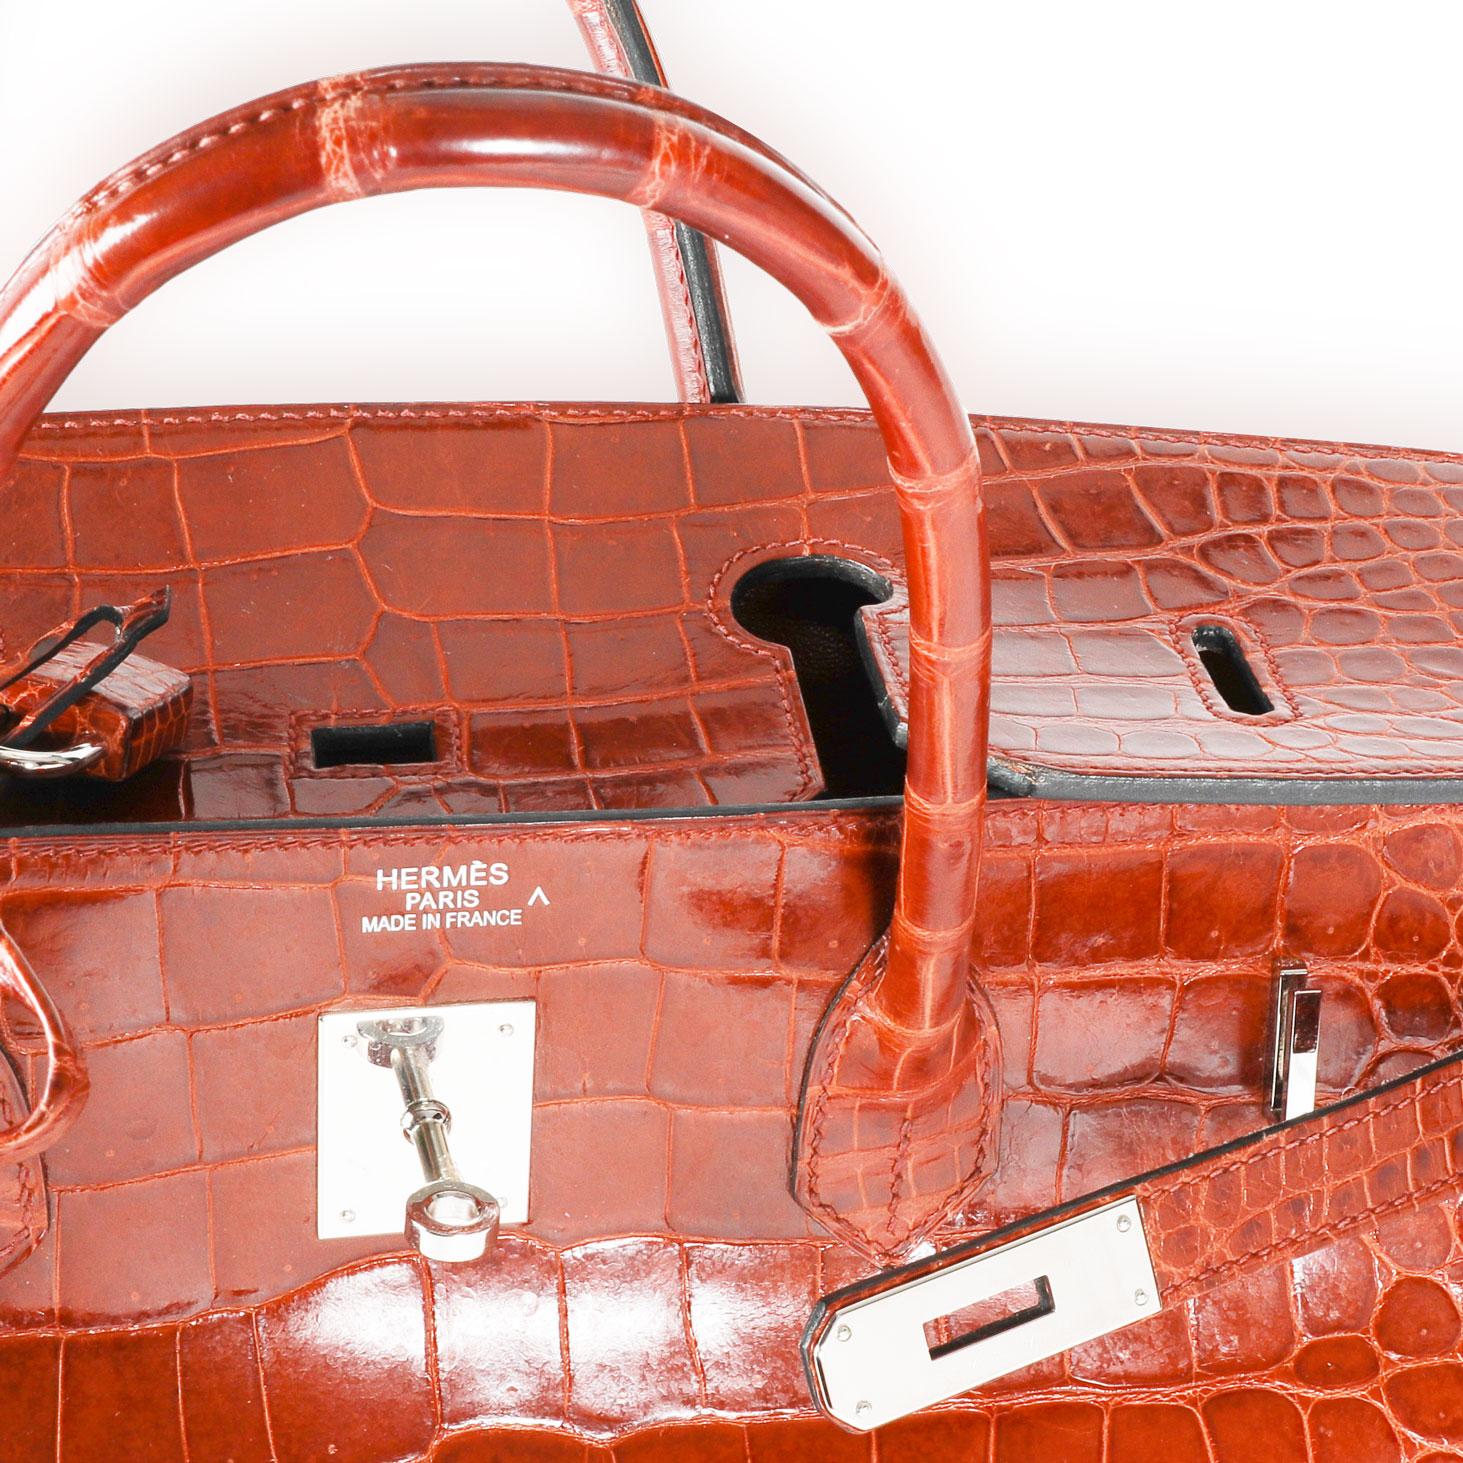 Hermès Rouge H Shiny Porosus Crocodile Birkin 40 PHW
SKU: 112665
Very Good Condition. Scuffing to corners. Cracking to handles. Scratching and tarnishing to hardware. Marks to interior. Please note: this item can not be shipped to all areas.

Brand: